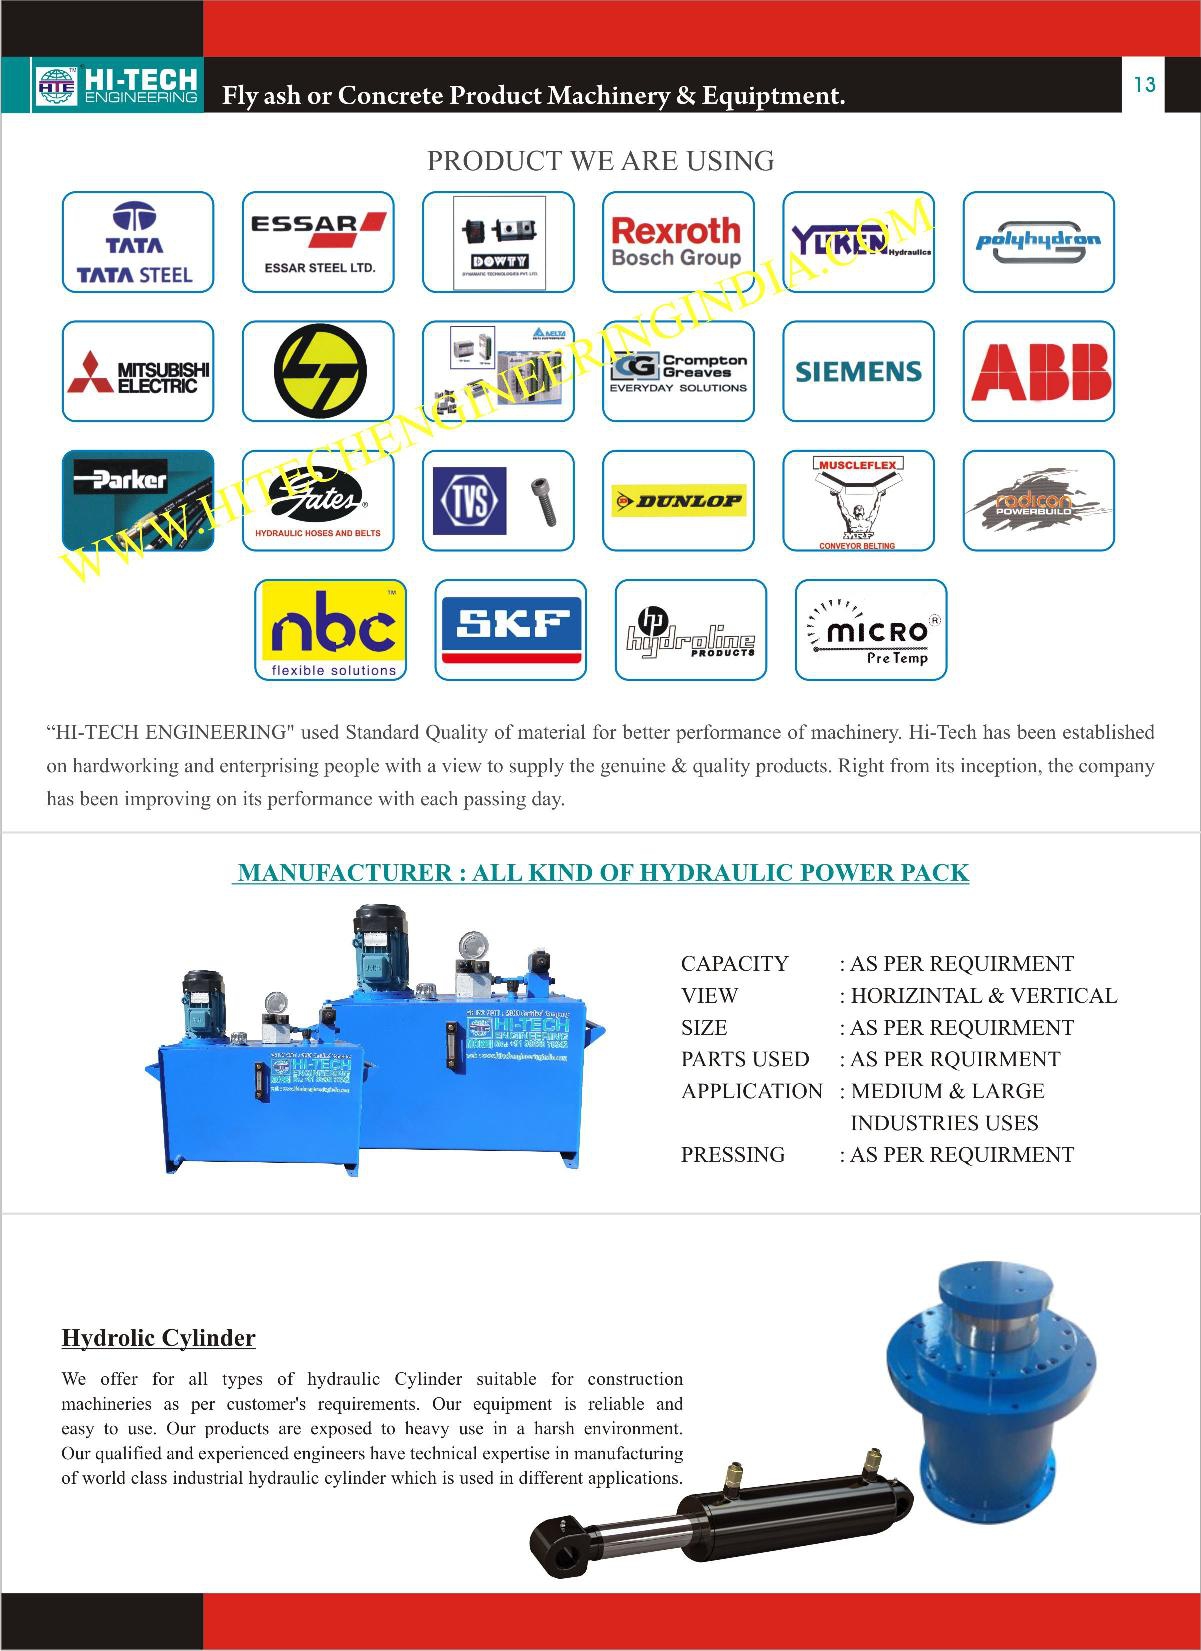 Hydraulic Power Pack from Hi Tech Engineering